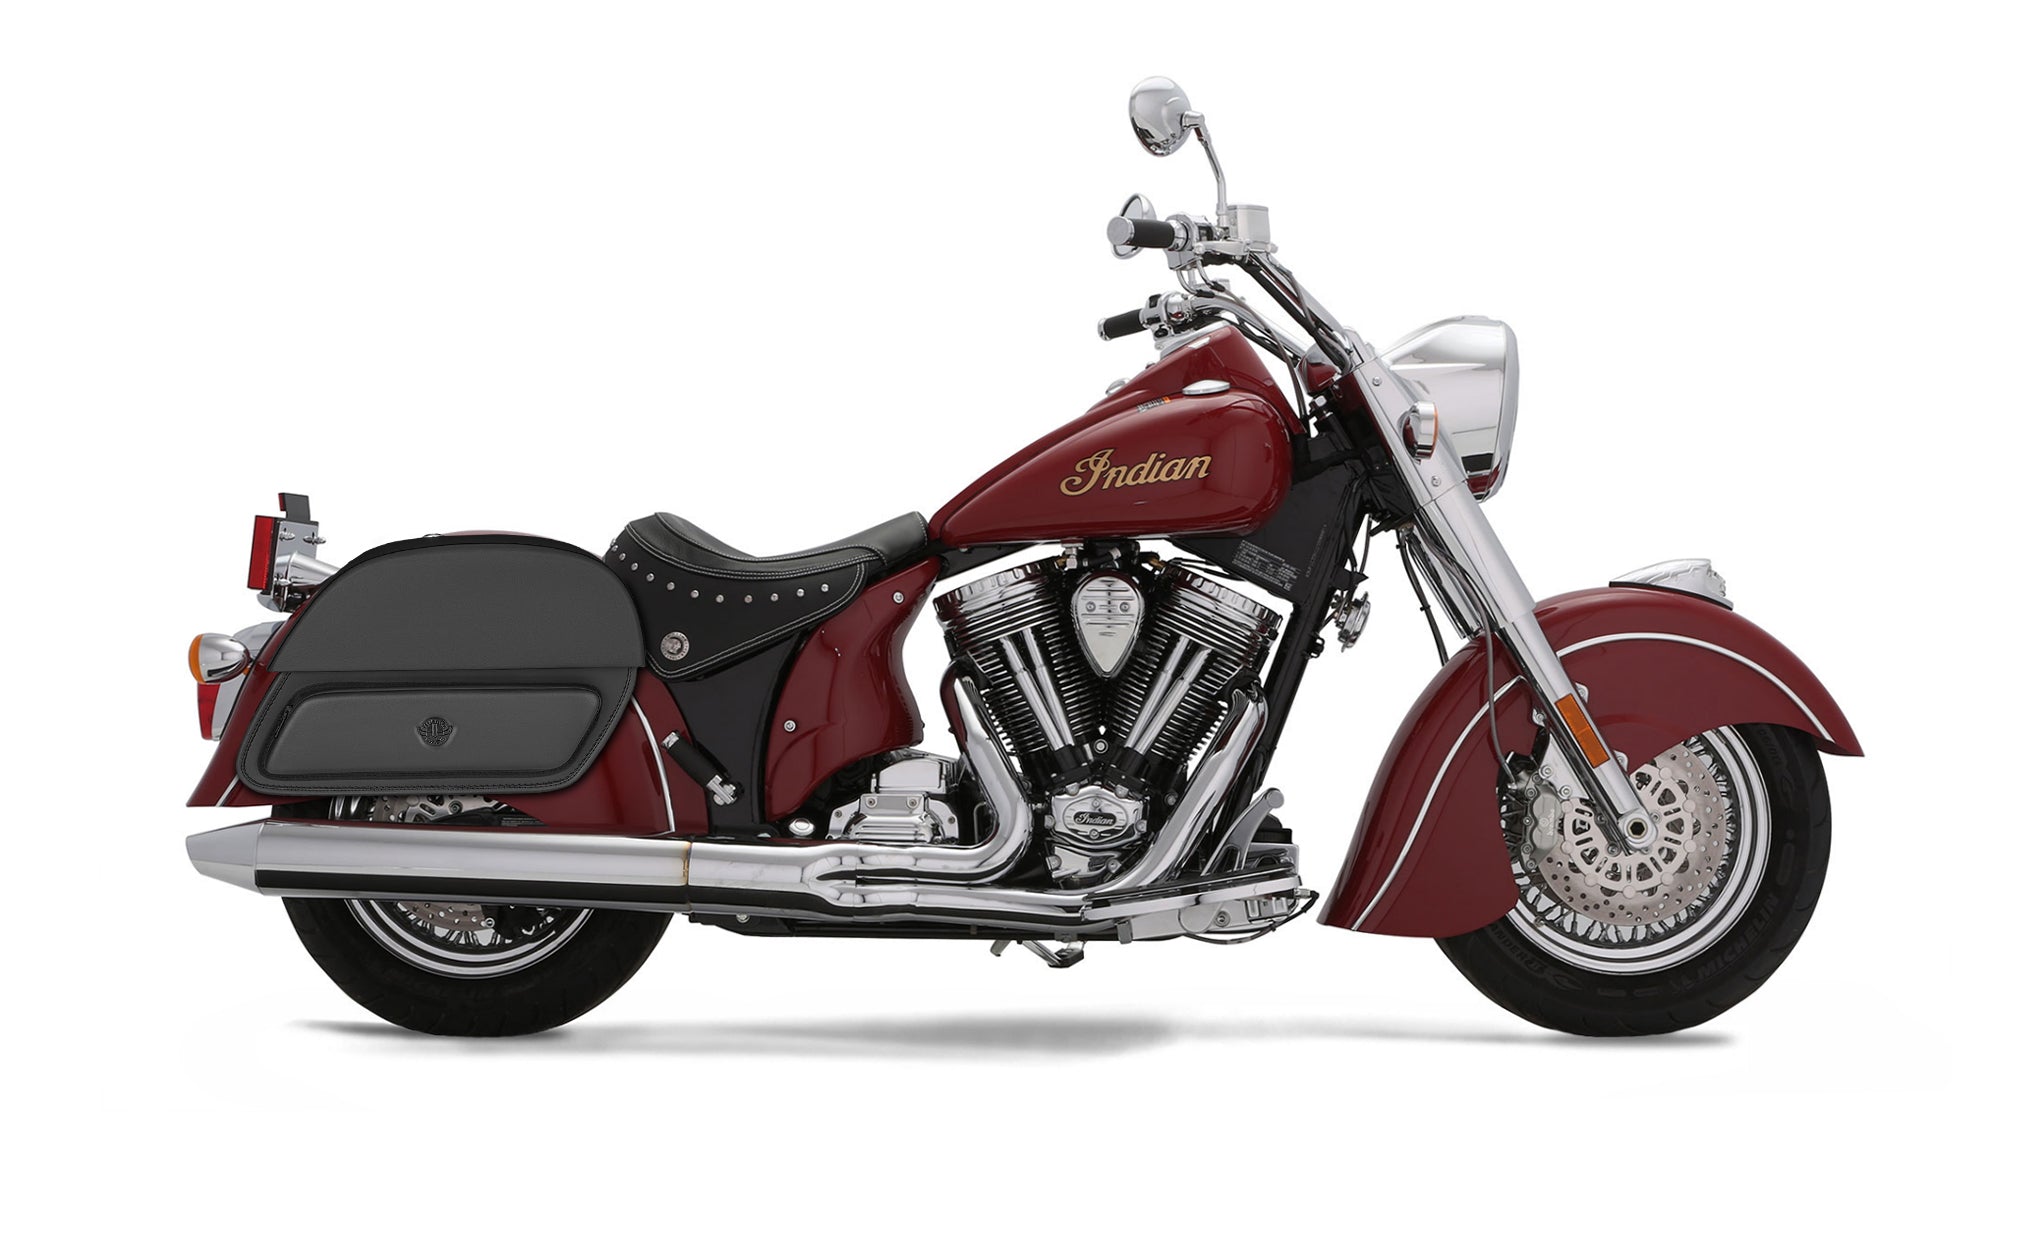 33L - Pantheon Large Indian Chief Deluxe Motorcycle Saddlebags on Bike Photo @expand